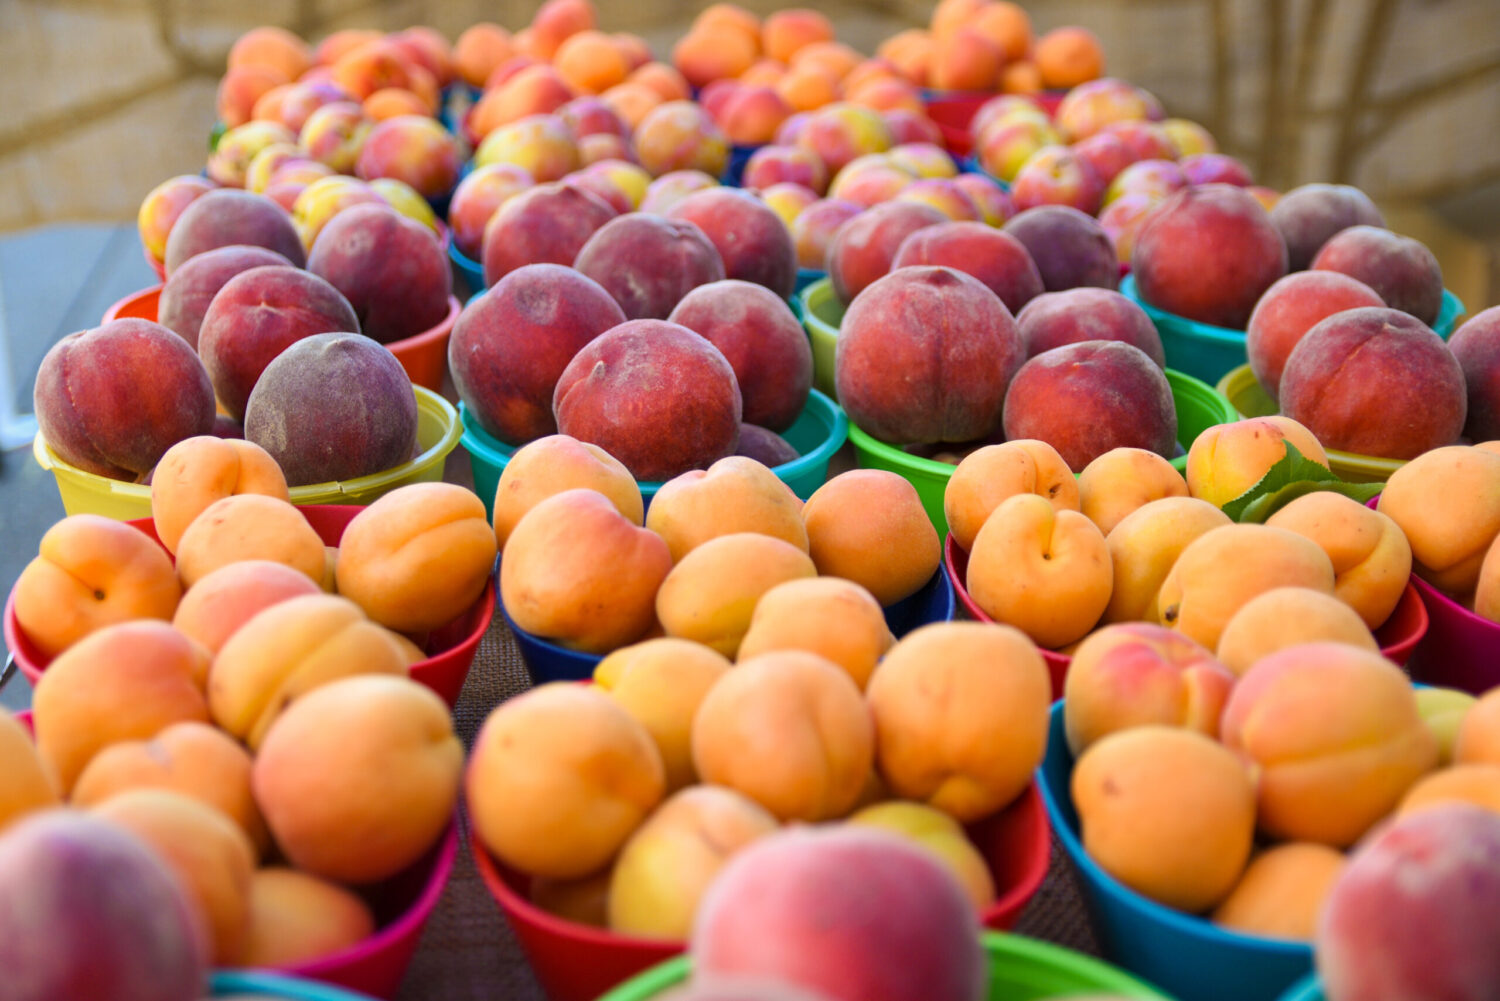 rows of brightly colored stone fruit